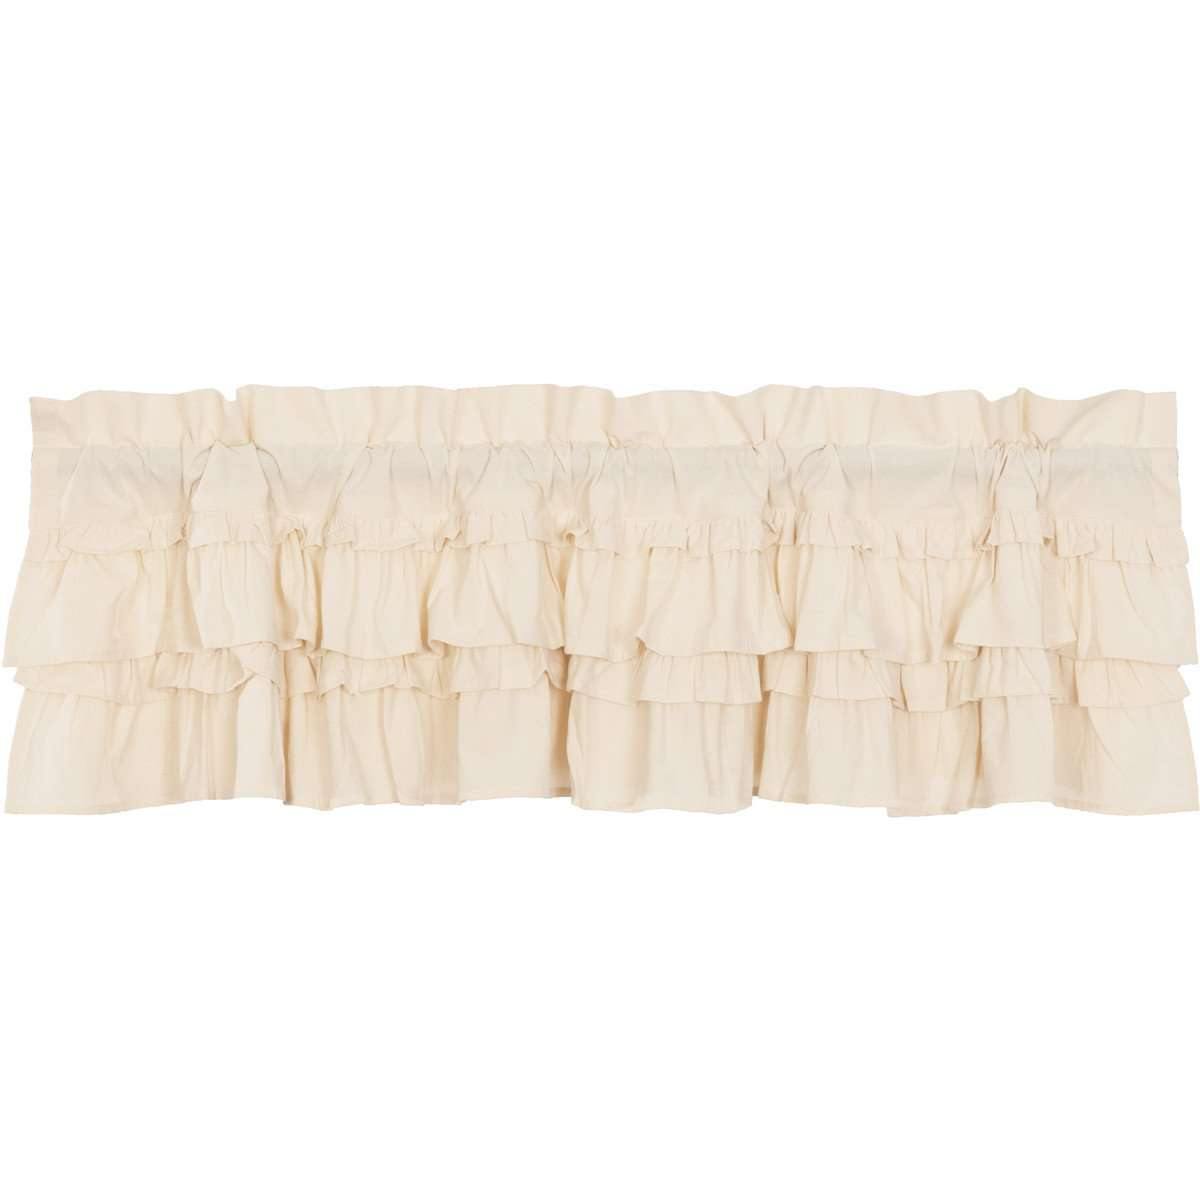 Muslin Ruffled Unbleached Natural Valance Curtain 16x60 VHC Brands - The Fox Decor